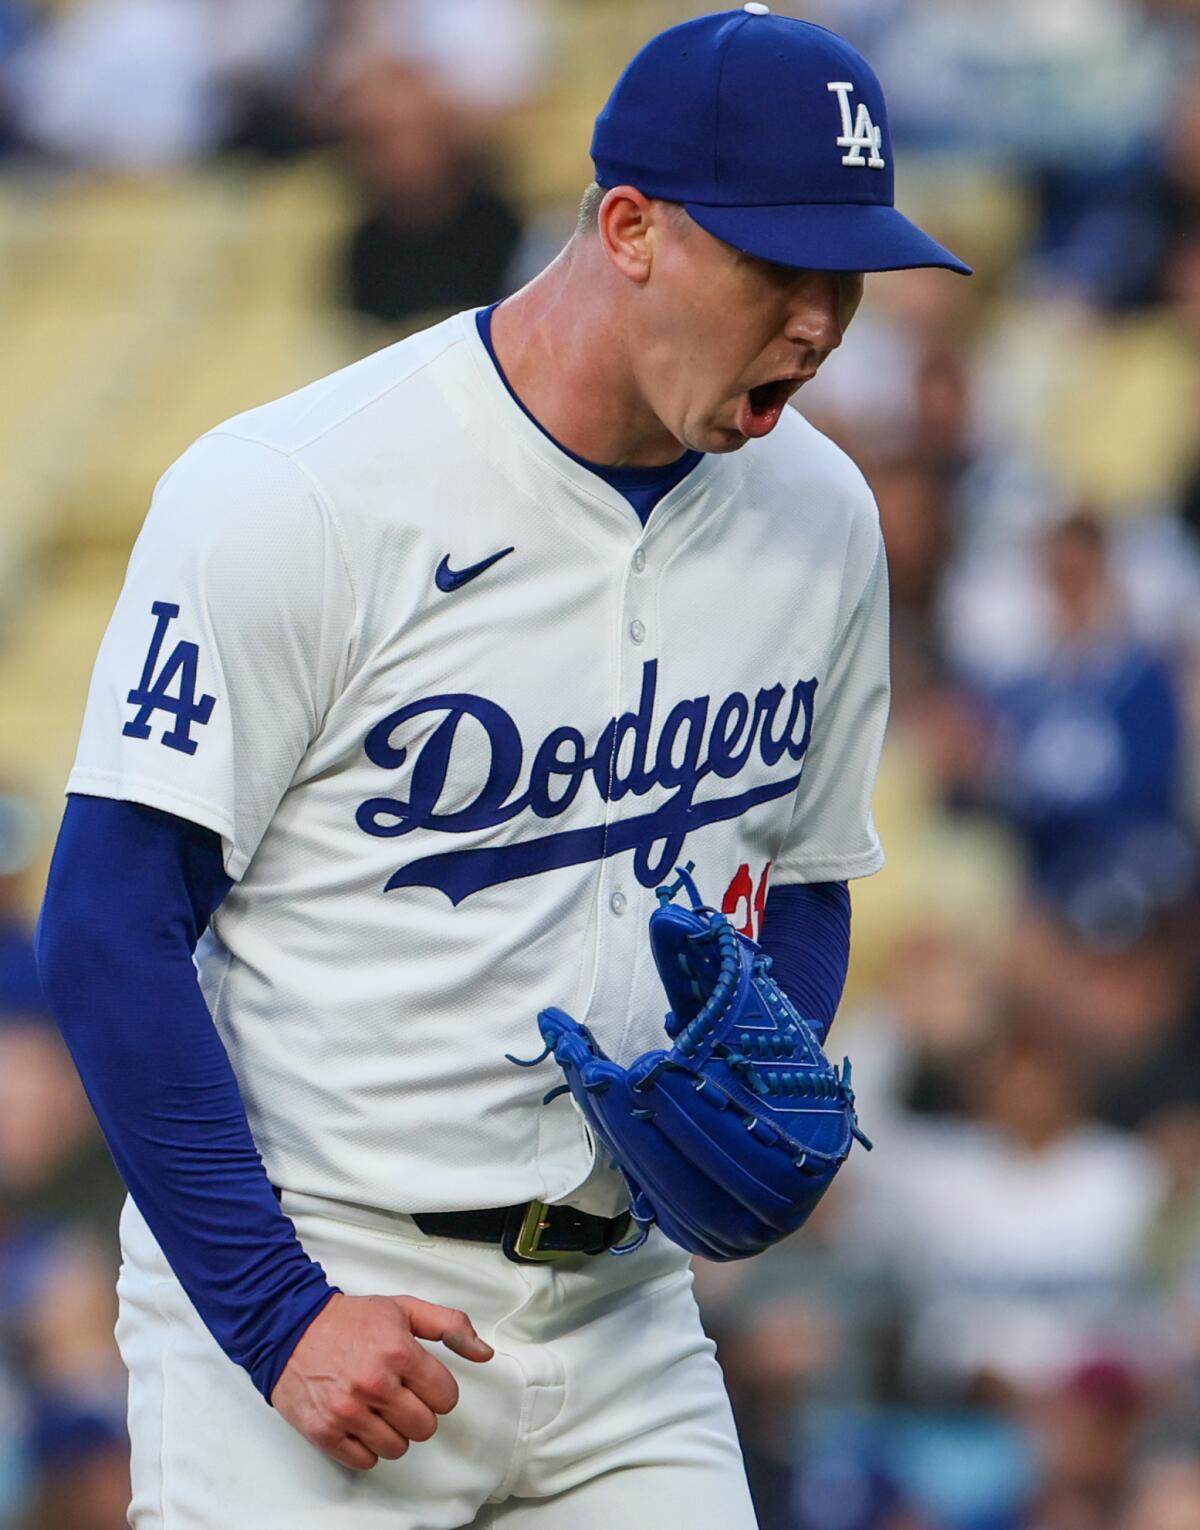 Dodgers starting pitcher Walker Buehler reacts after striking out Colorado's Brendan Rodgers.